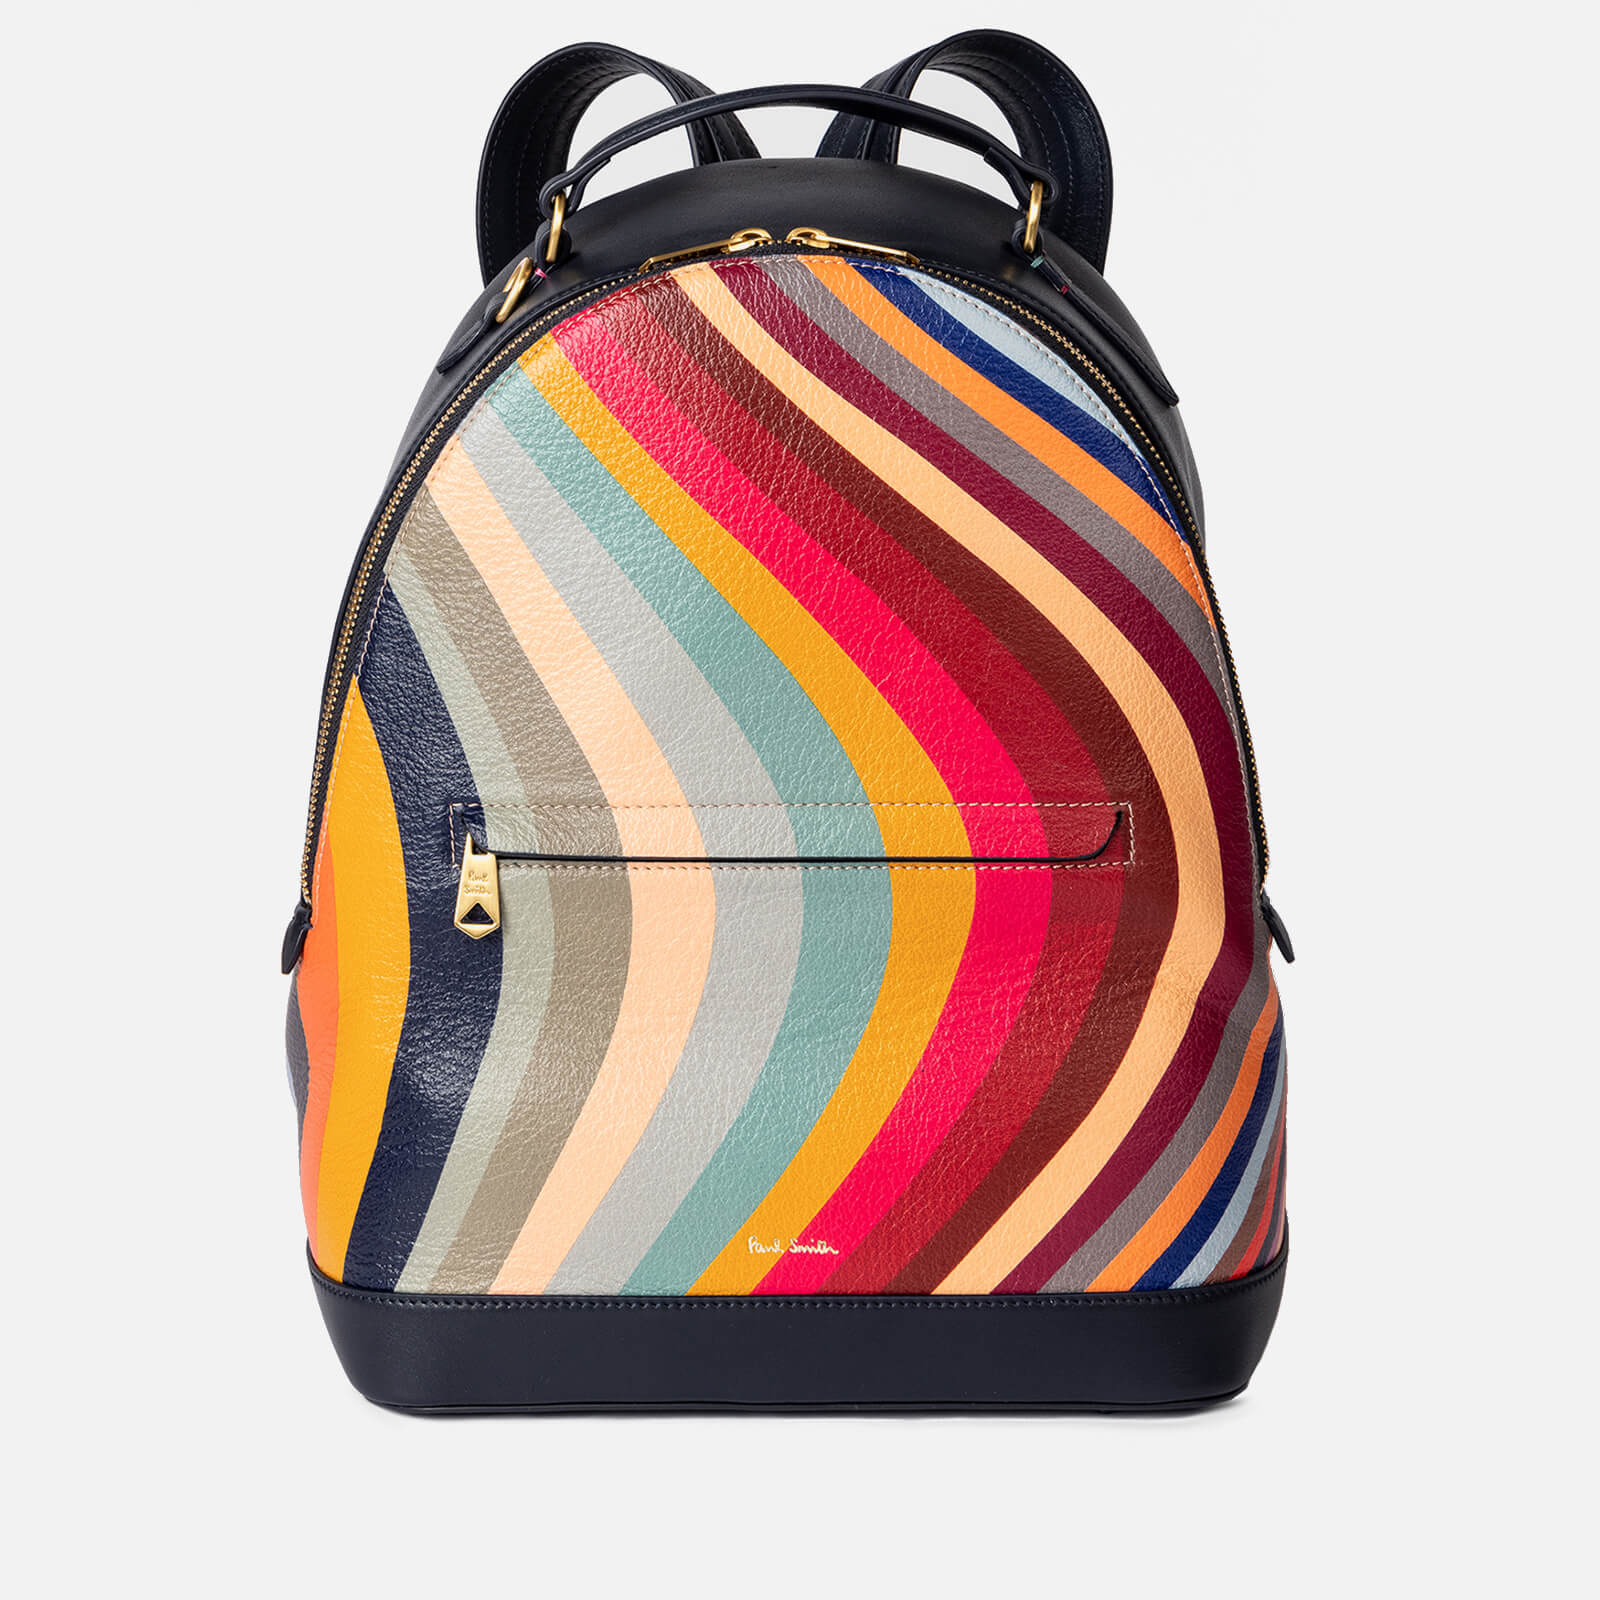 Paul Smith Swirl Striped Leather Backpack von Paul Smith